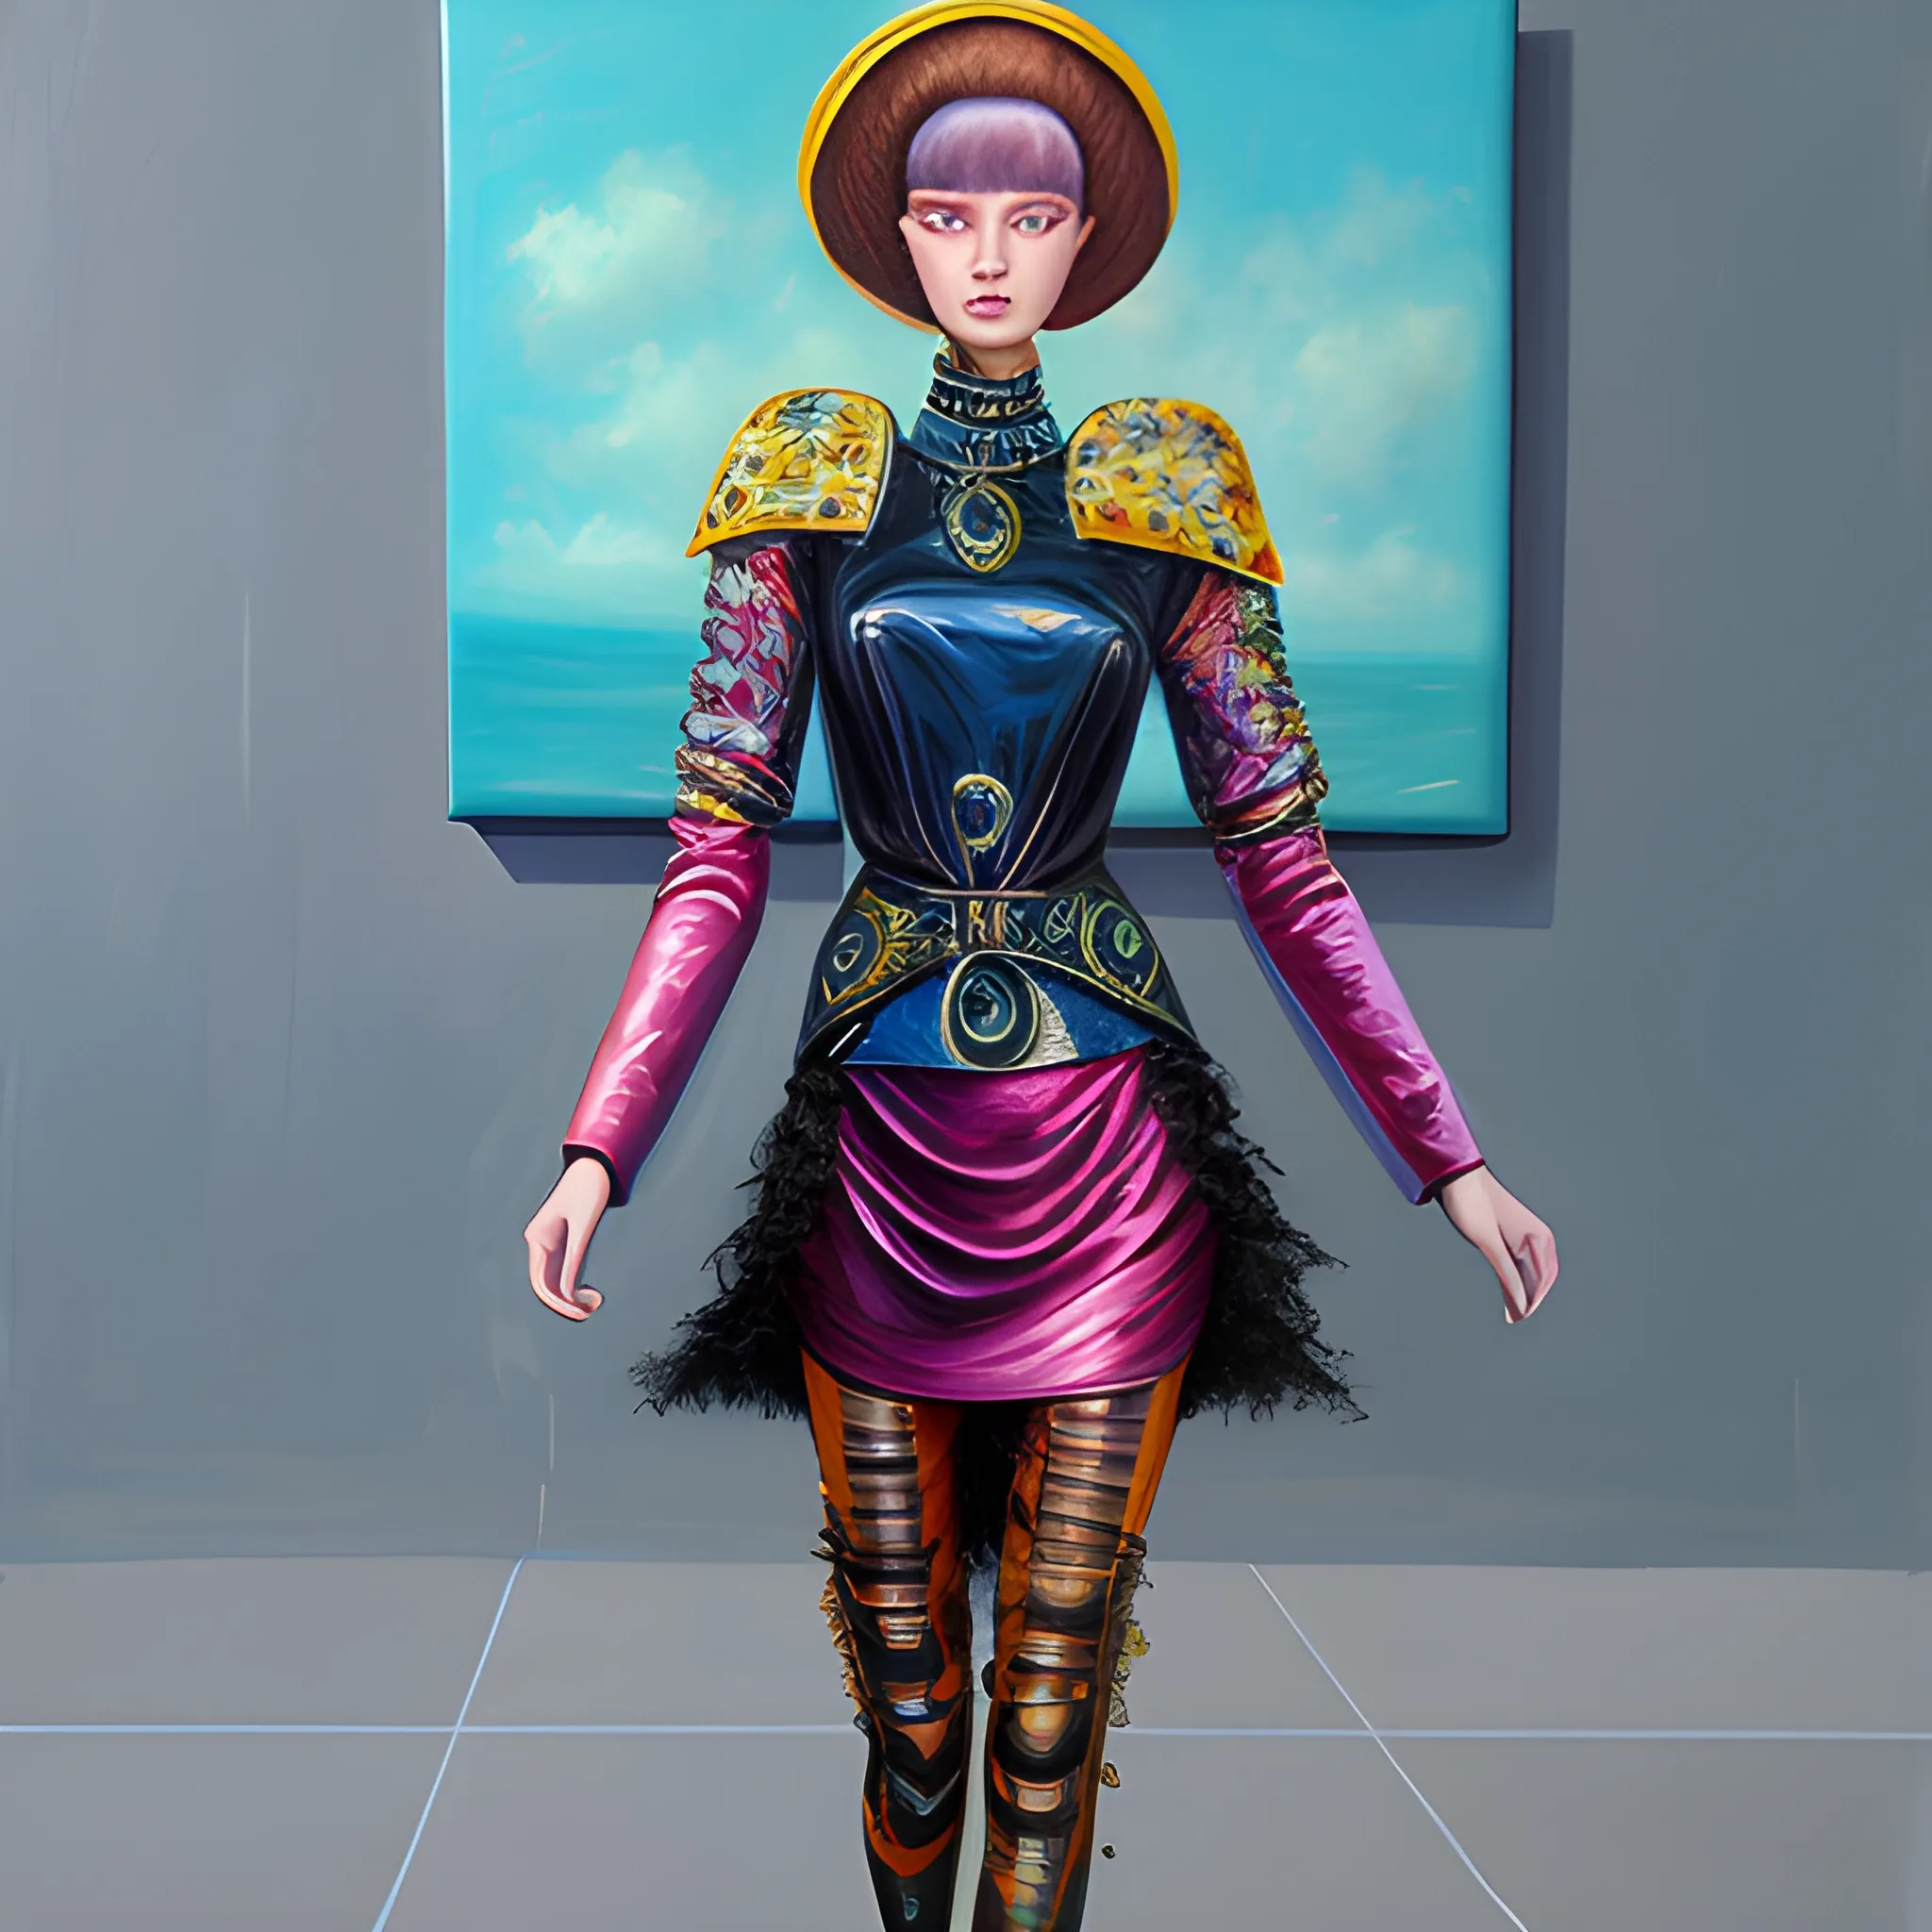 Fashion in 2200, Oil Painting